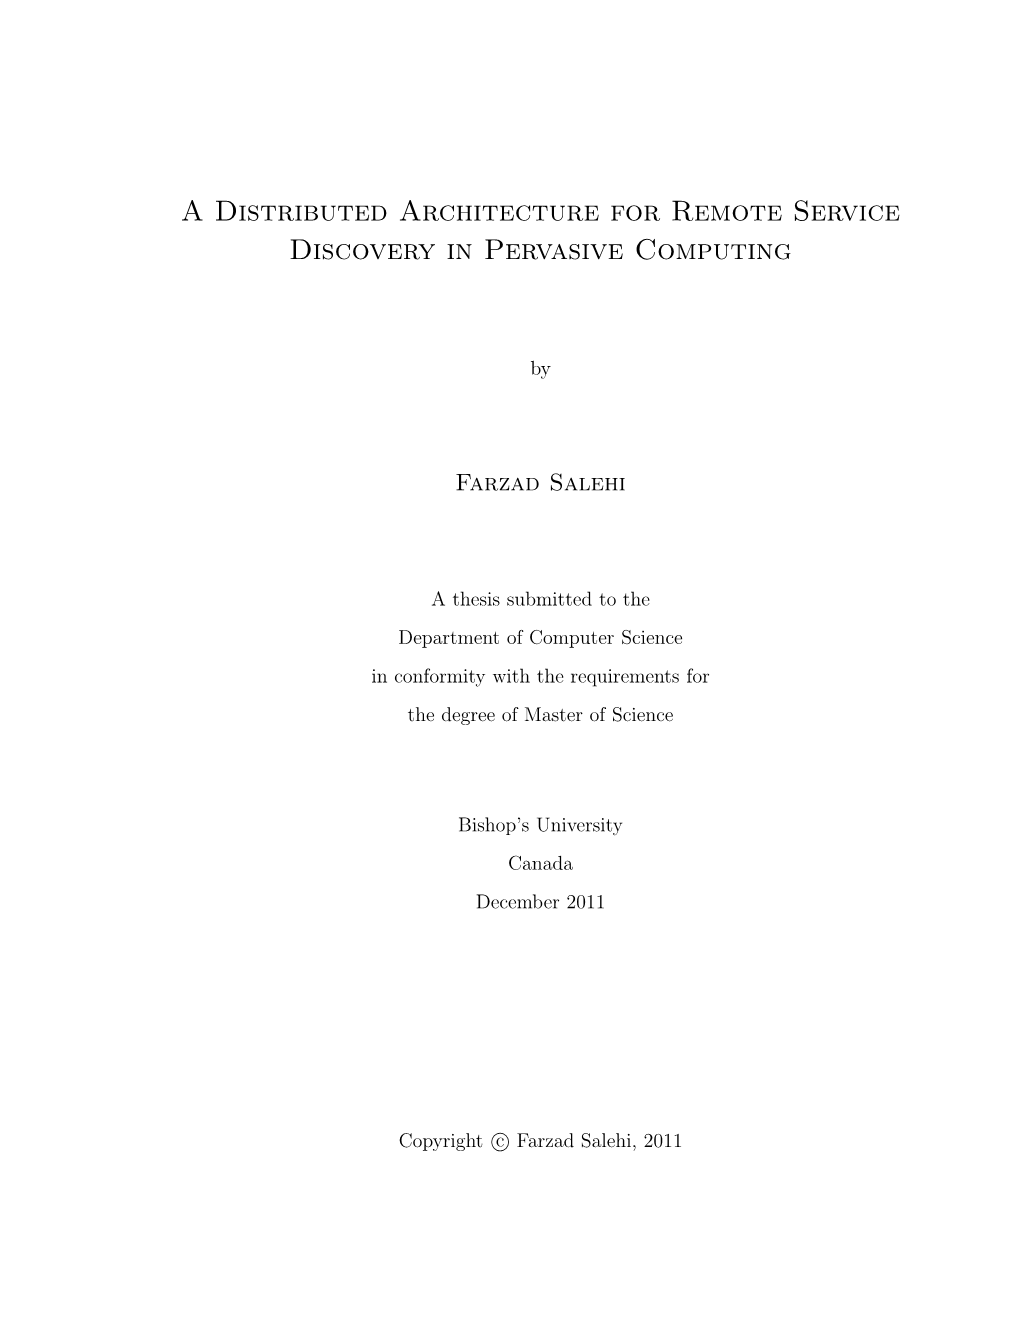 A Distributed Architecture for Remote Service Discovery in Pervasive Computing